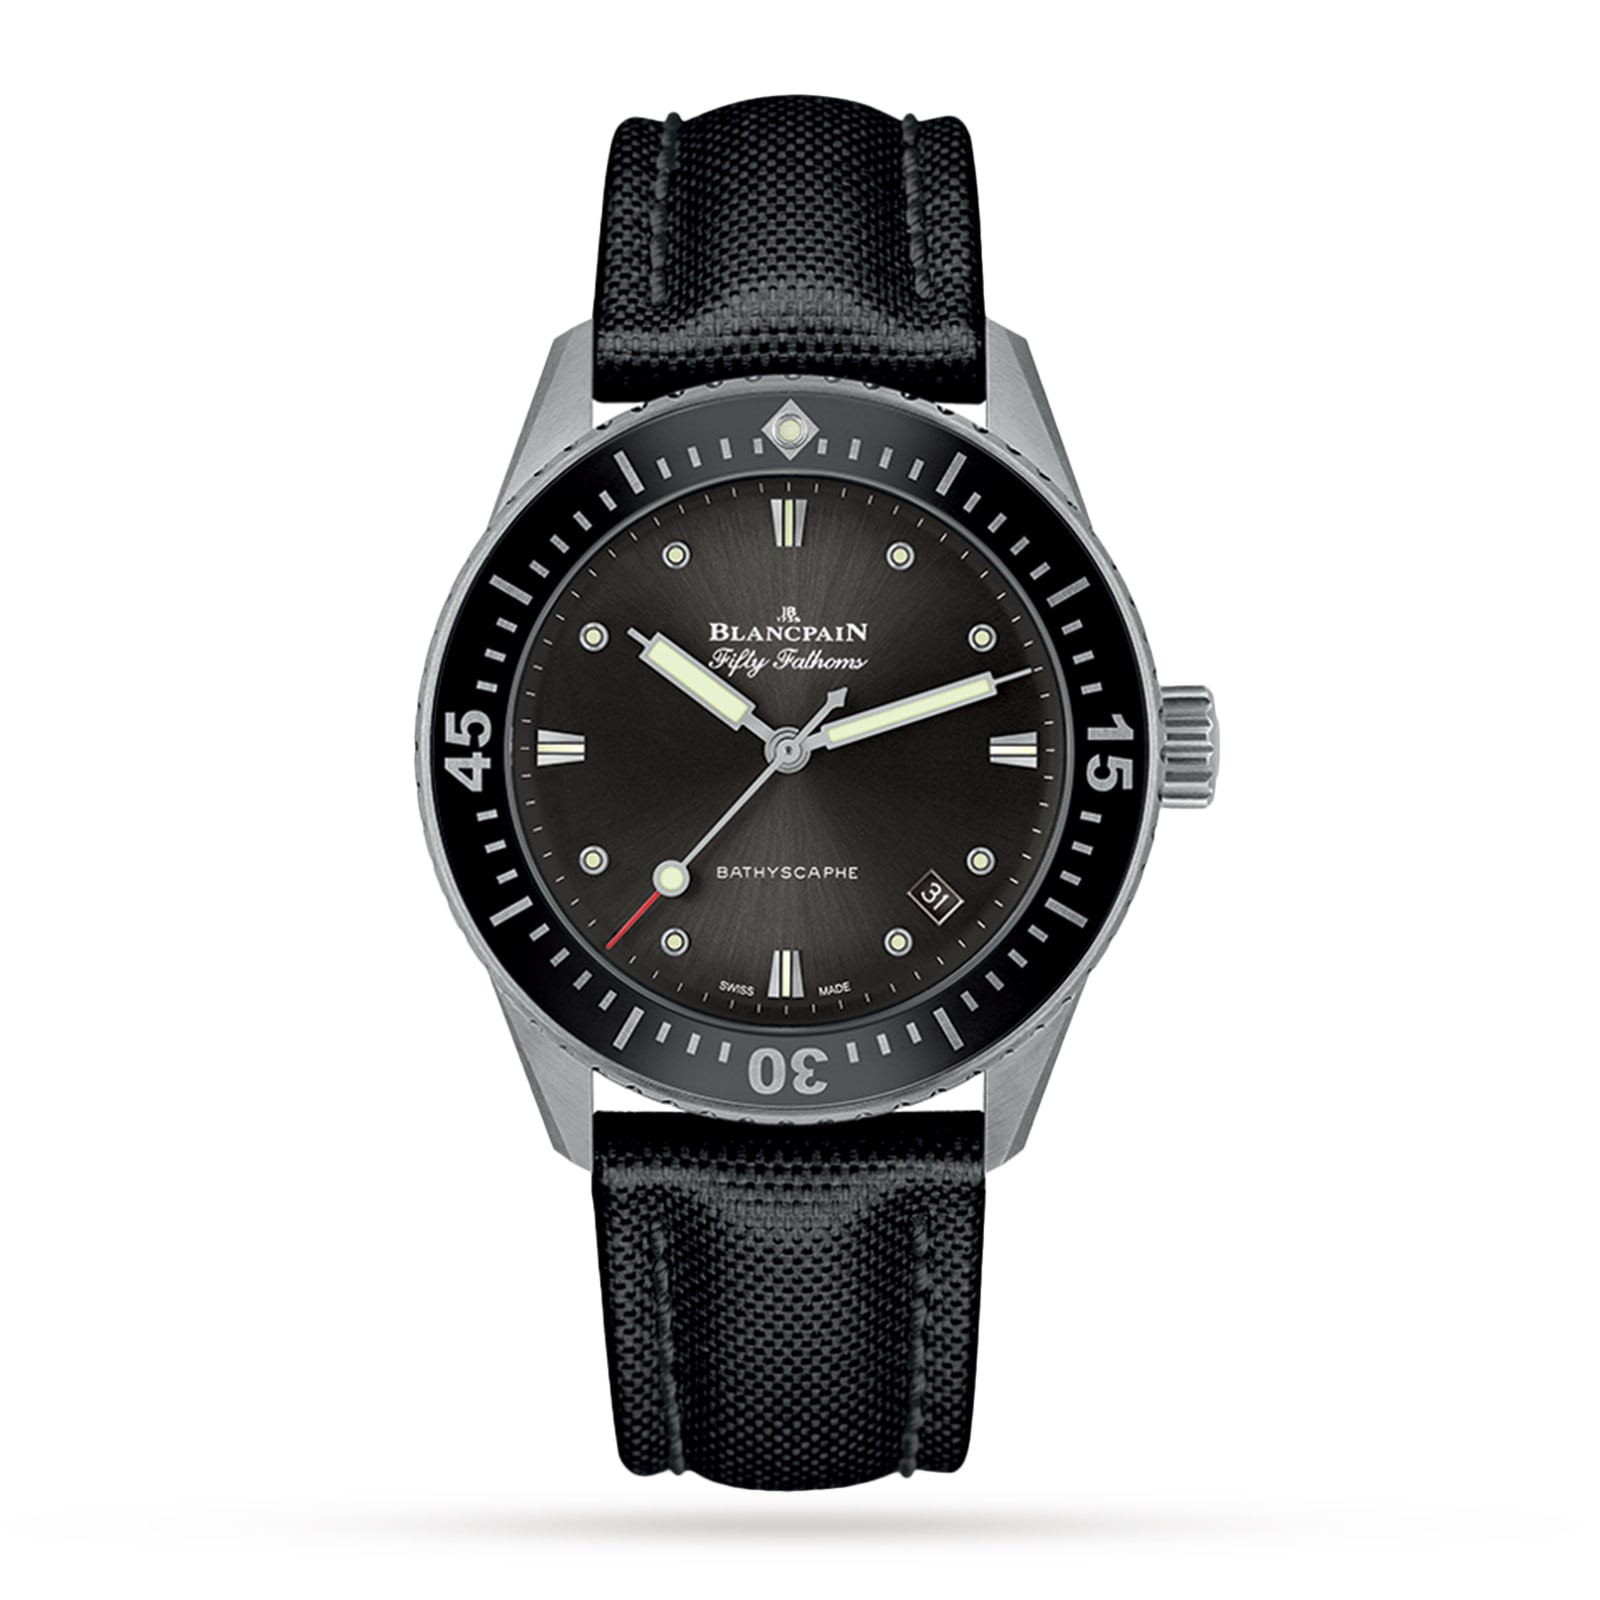 Blancpain Fifty Fathoms Bathyscaphe Titanium Unworn 5000 1210... for  $11,890 for sale from a Seller on Chrono24